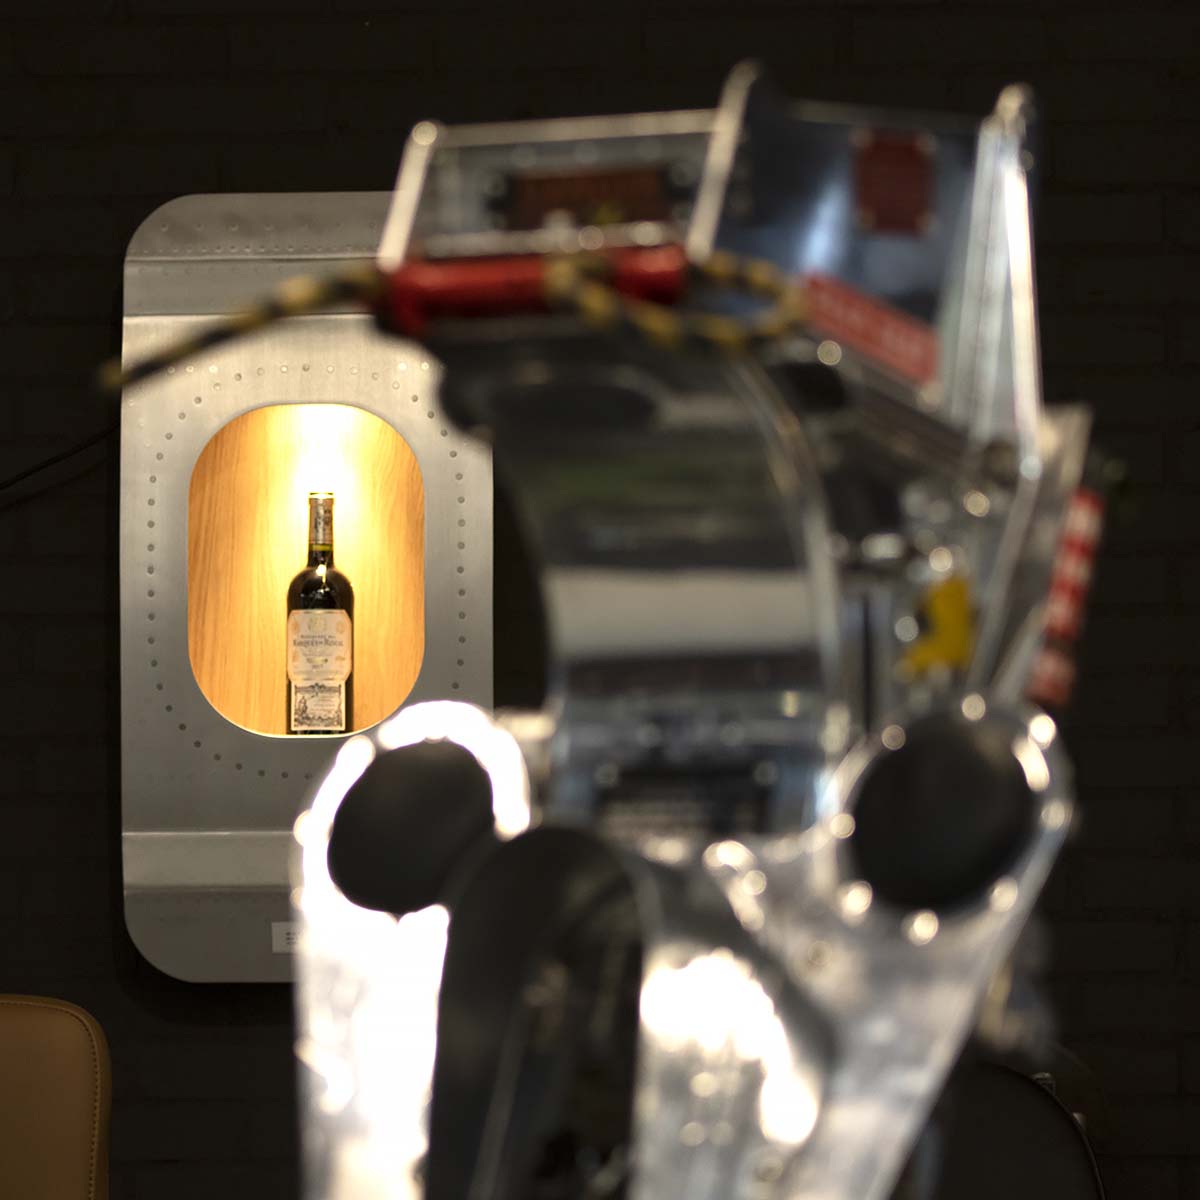 Aircraft window section wall bar hanging on a wall behind a mirror-polished ejection seat.